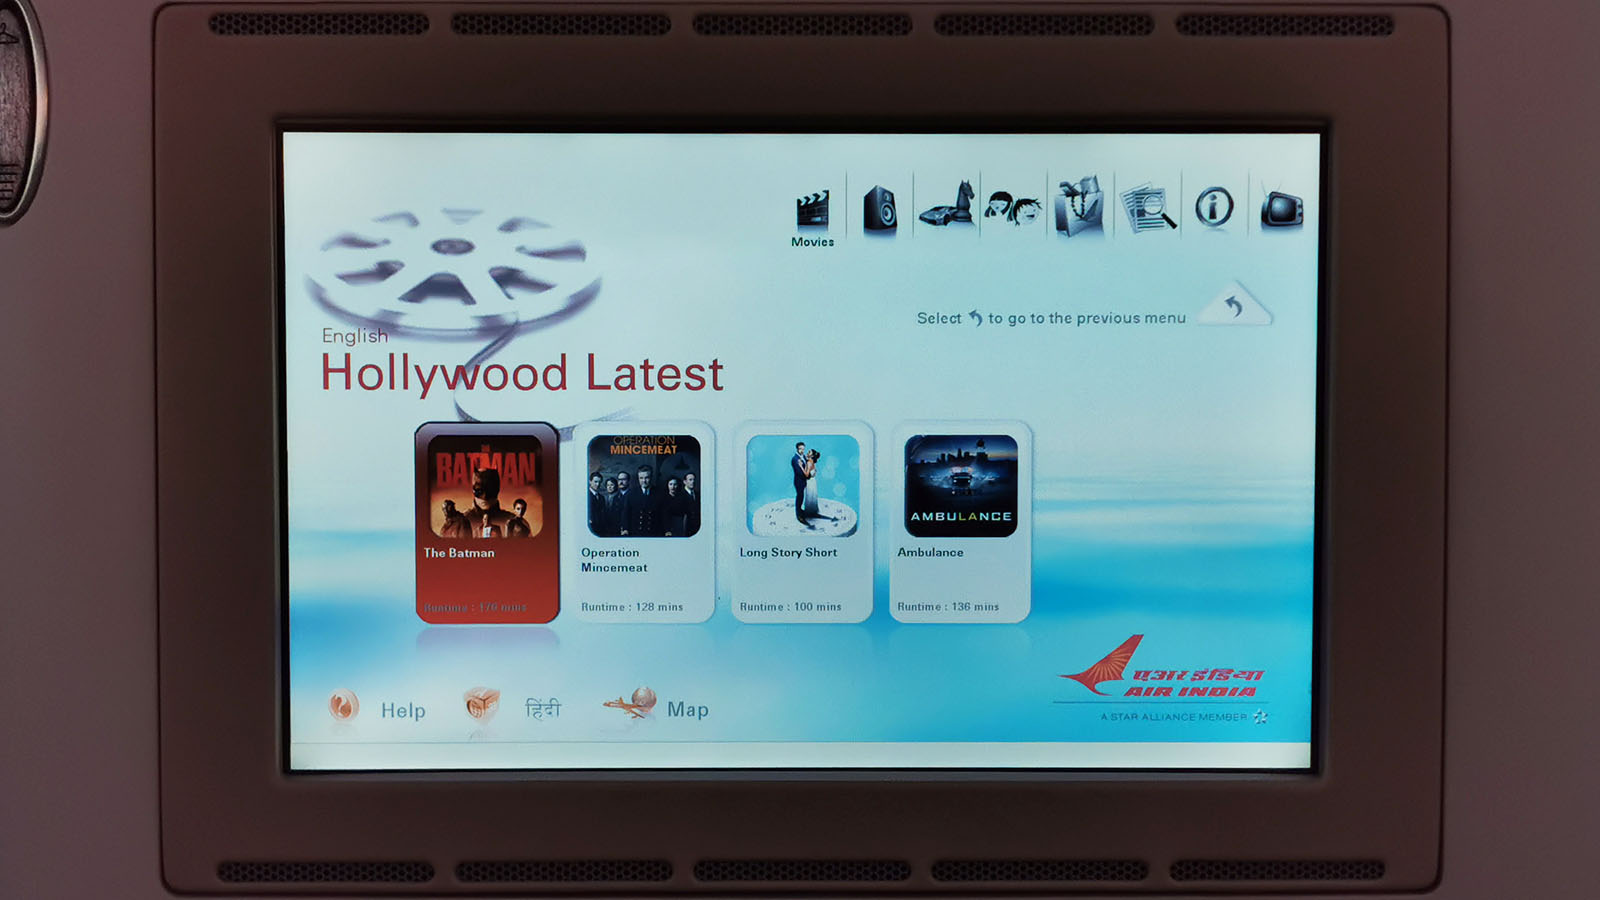 Movie selections in Air India's Boeing 787 Business Class